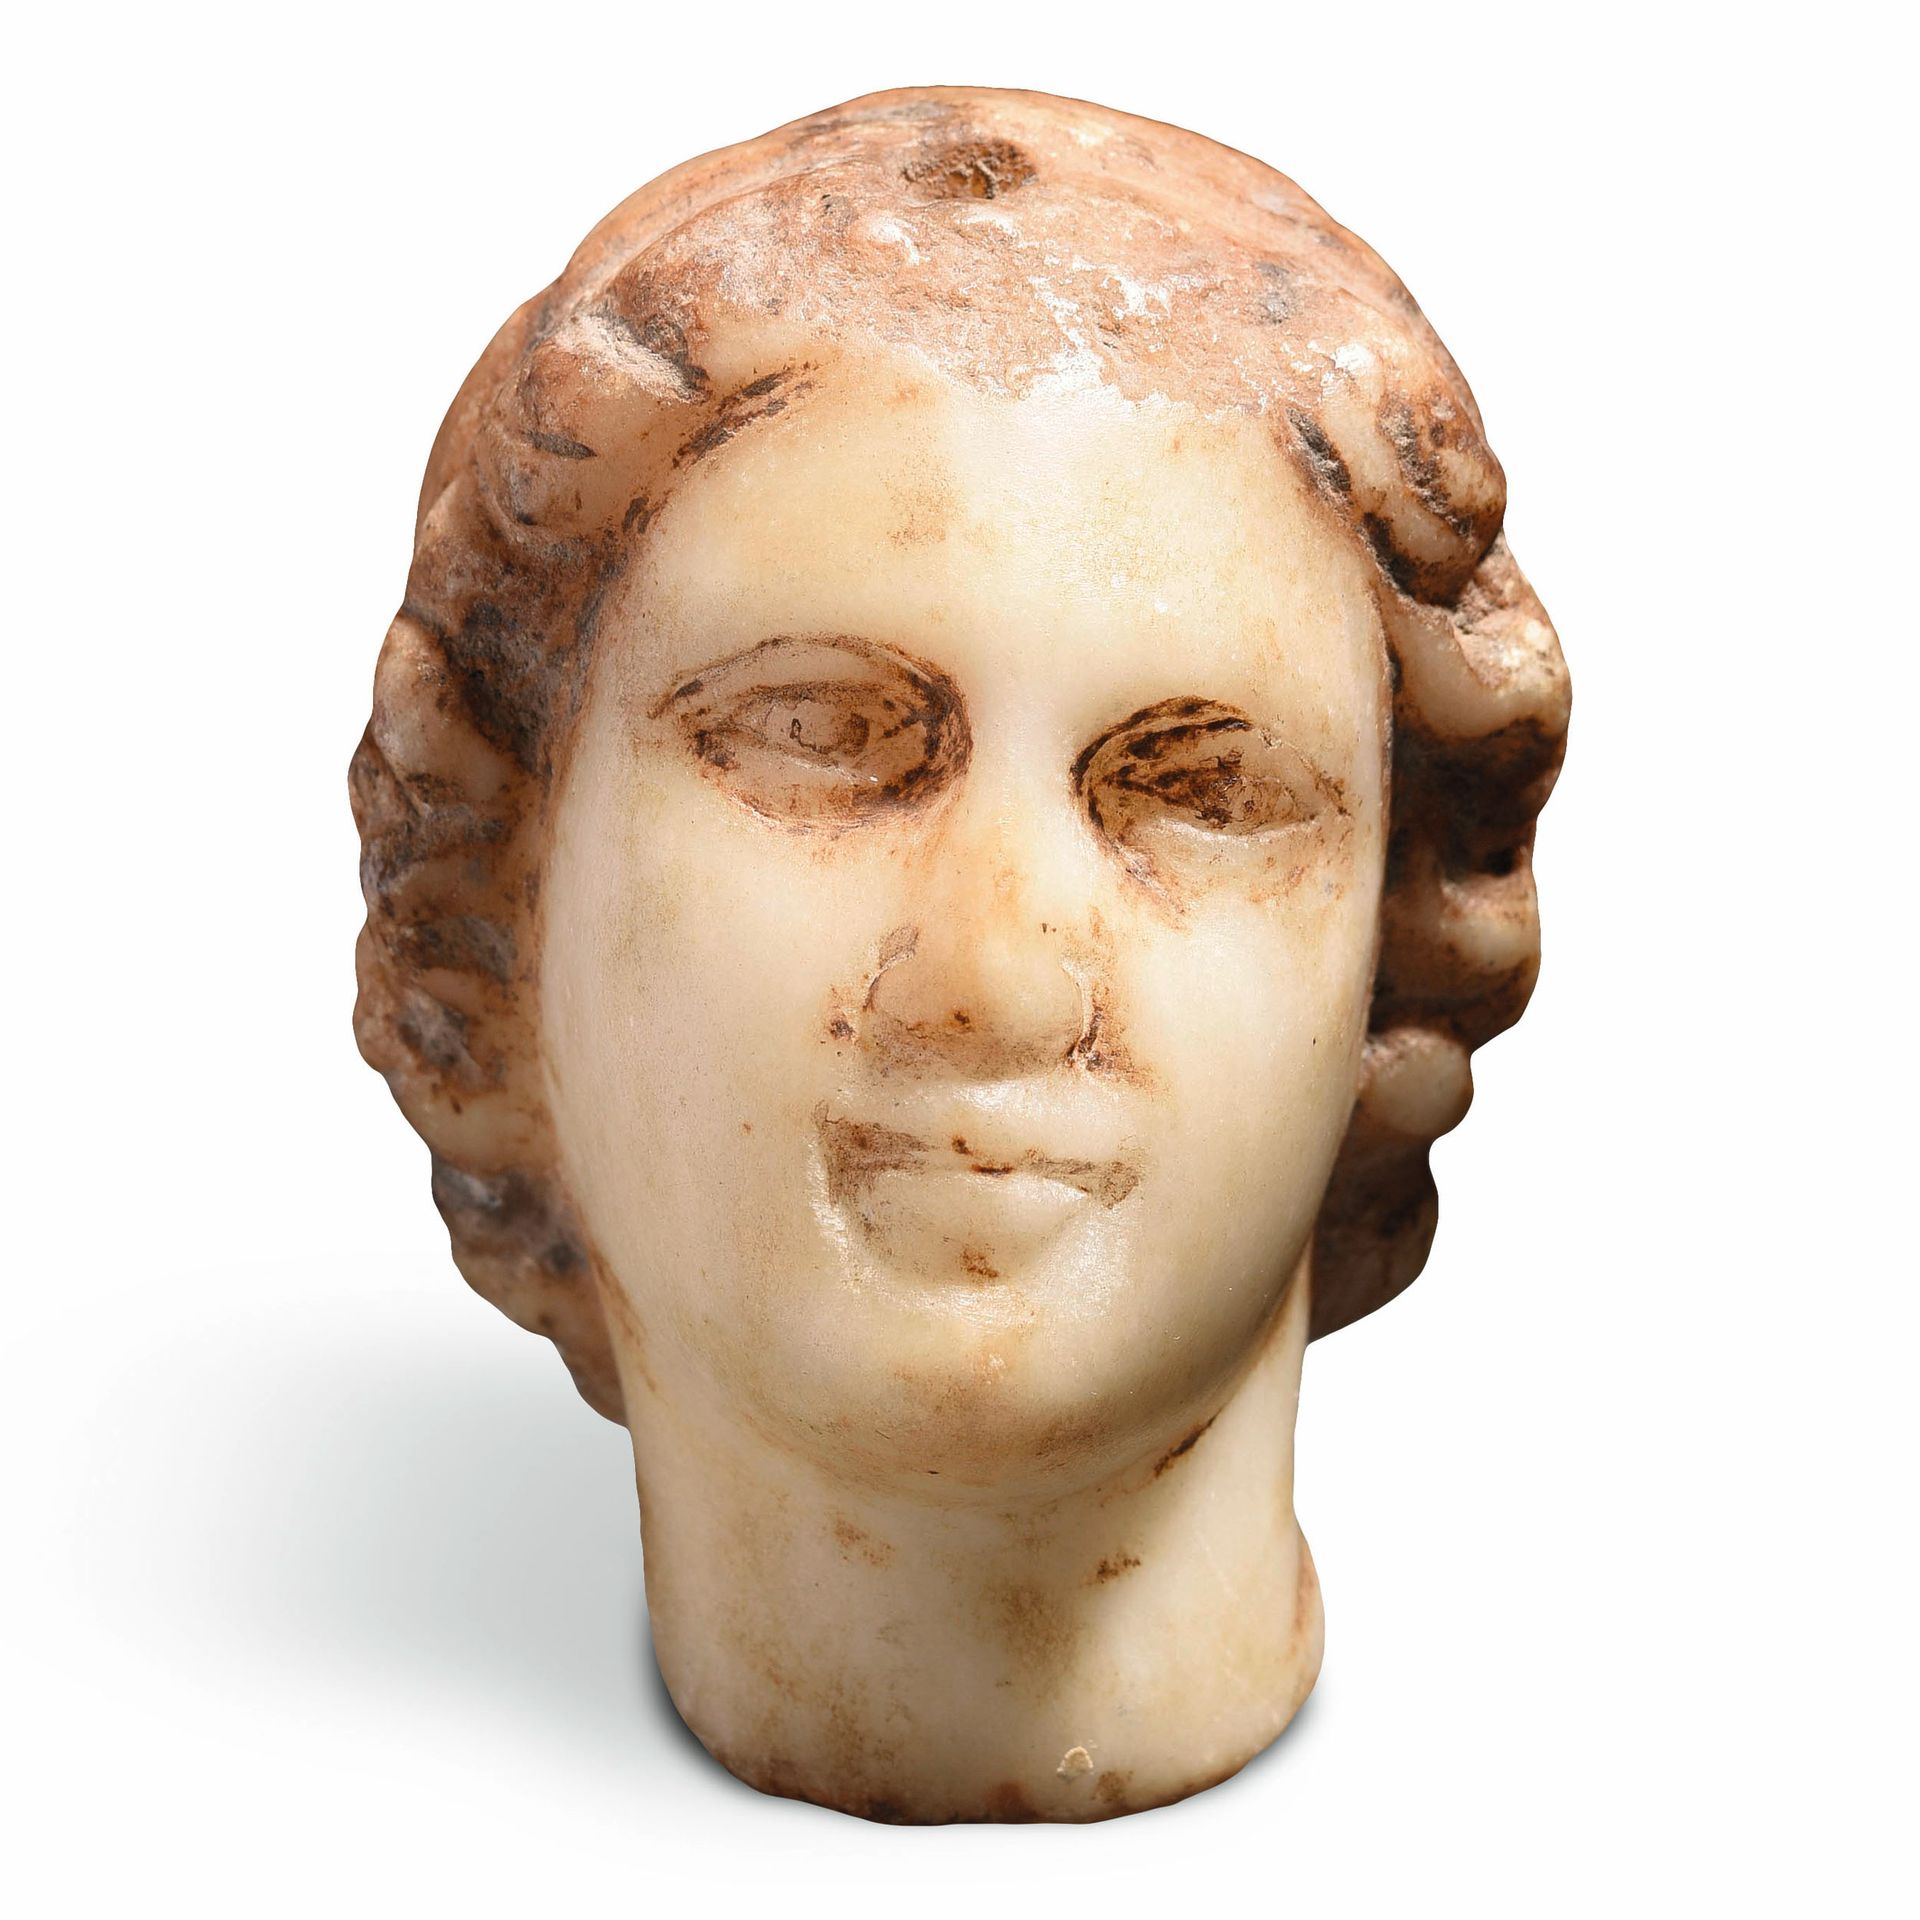 Null FEMALE HEAD

Hellenistic art from the East, 2nd century B.C.

White marble &hellip;